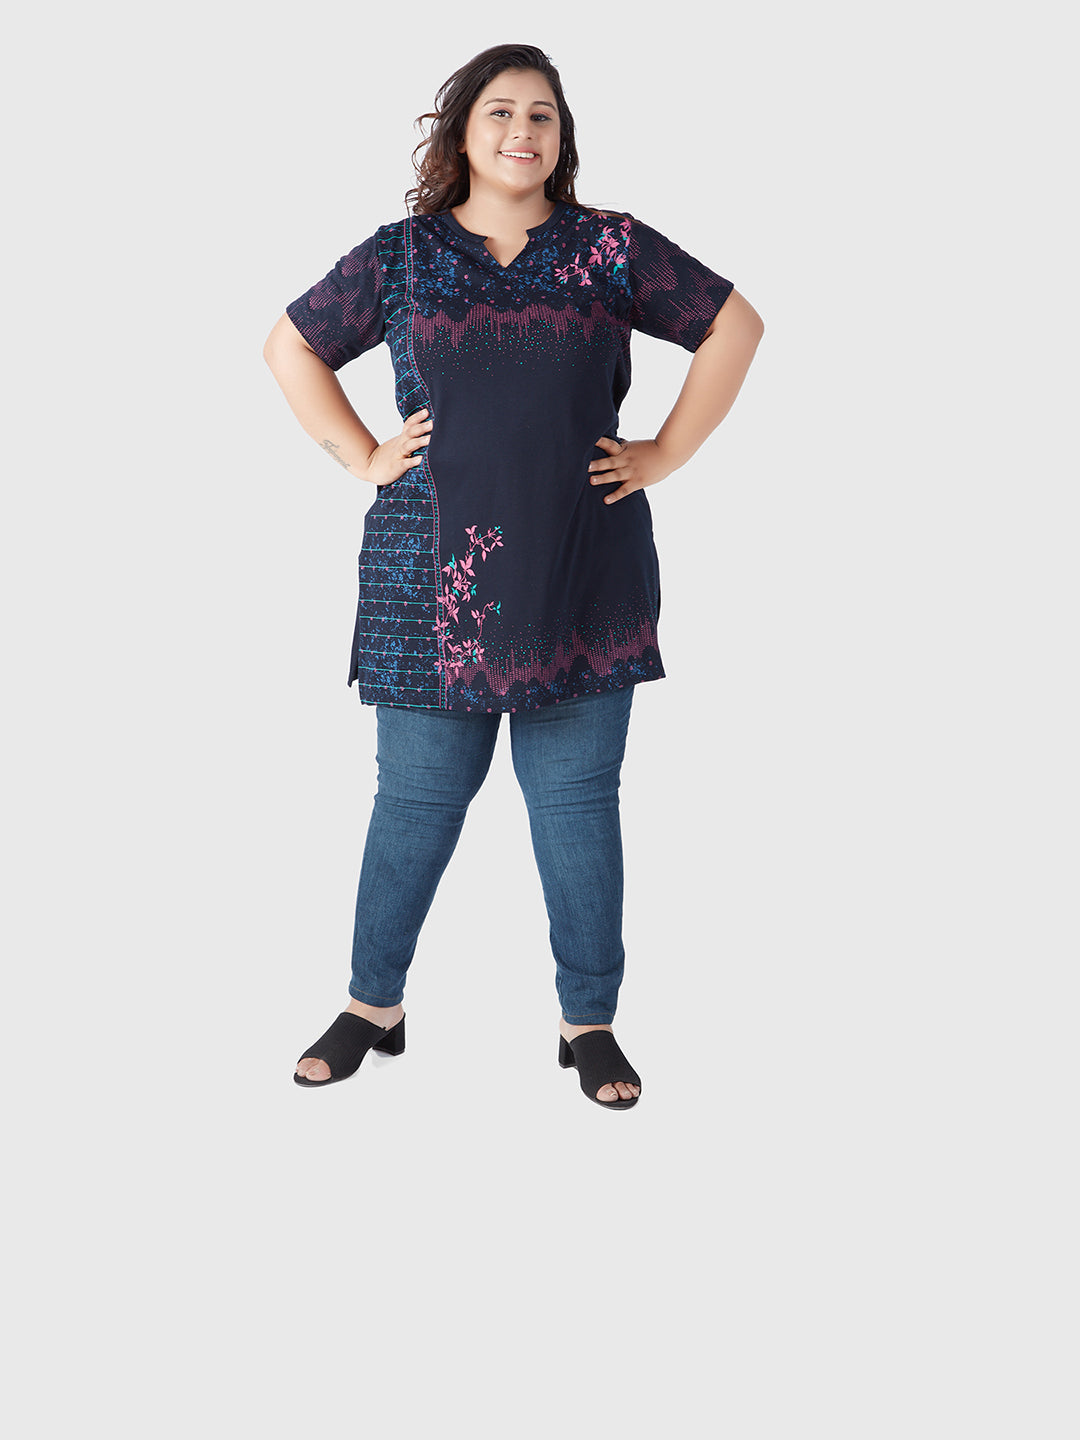 Stylish Navy Blue Plus Size Printed Cotton Long Top(Half Sleeves) For Women online in India